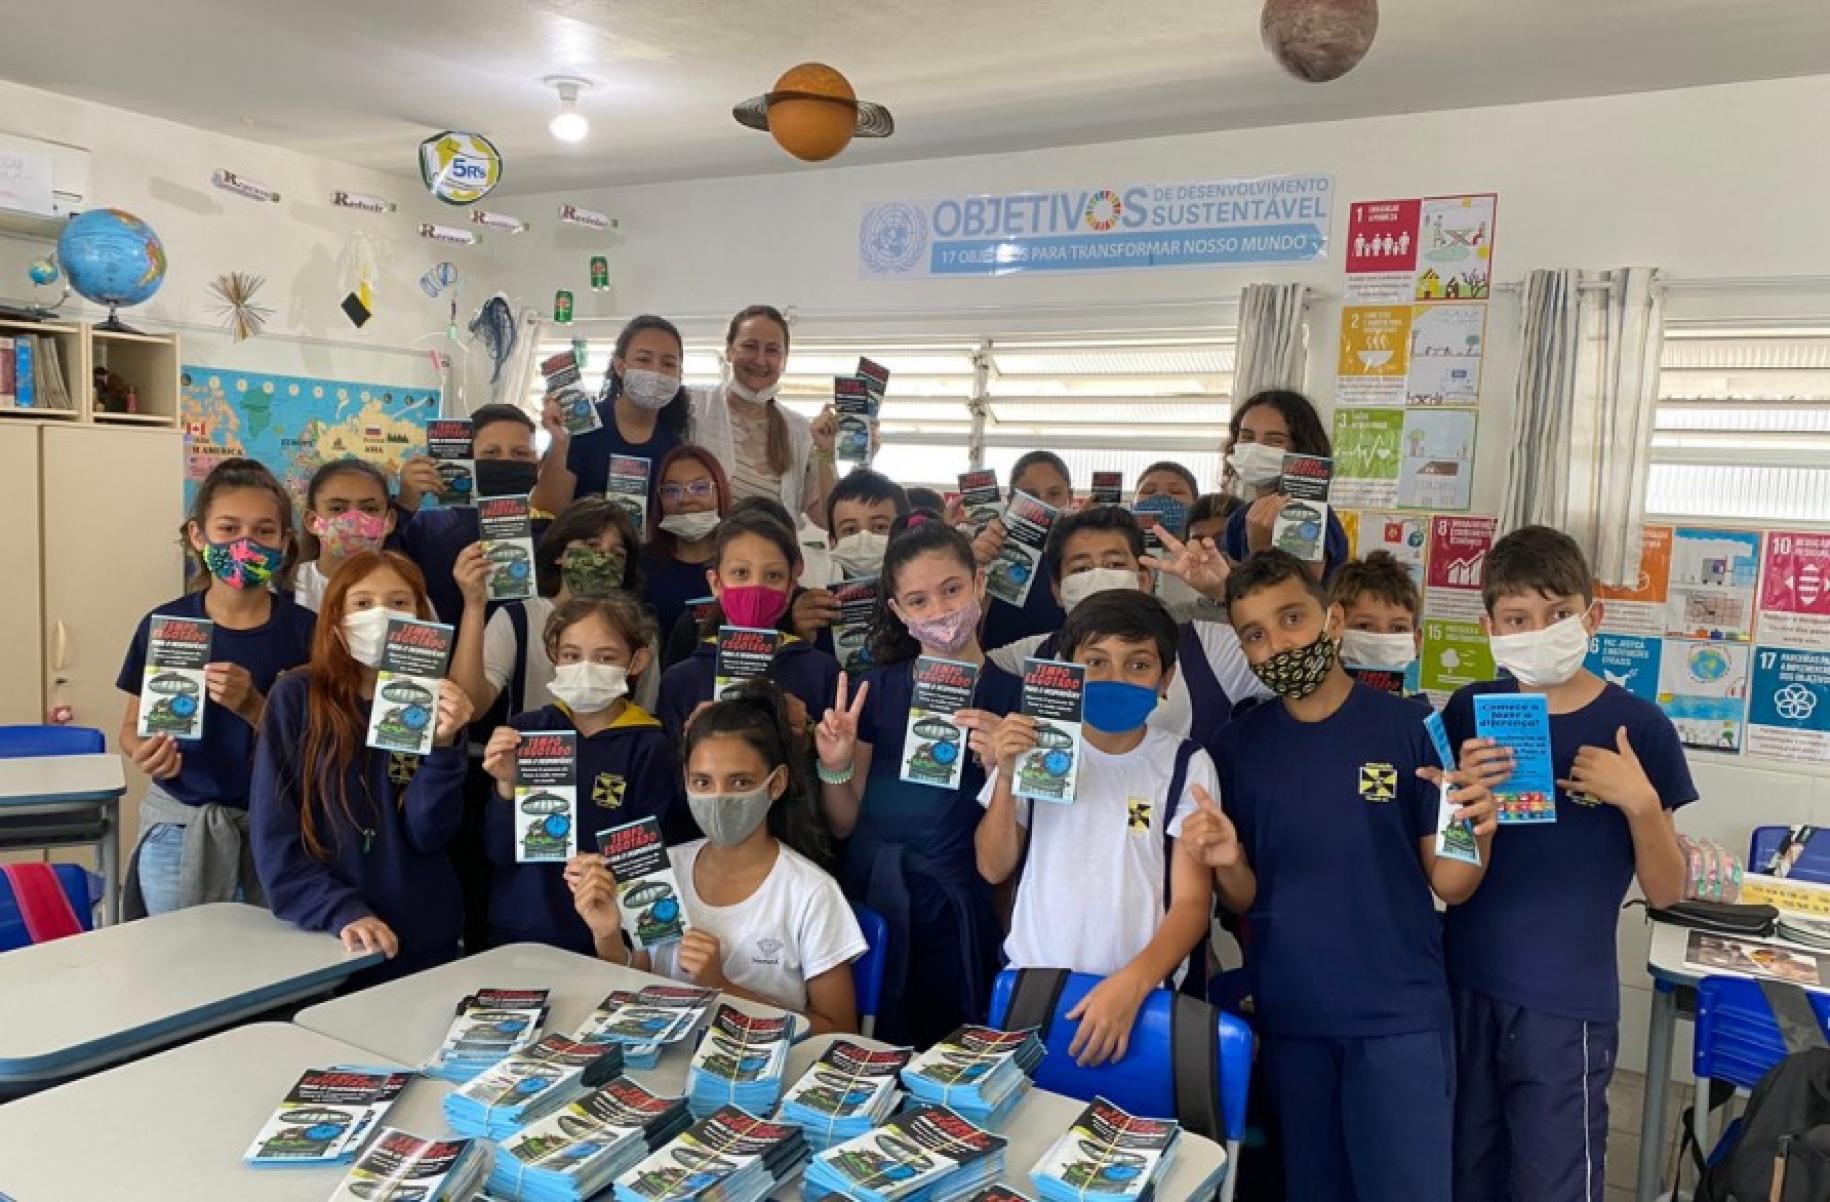 A group picture of classmates shows elementary school students and their teacher standing next to each other, wearing facemasks and displaying the results of their undertakings.